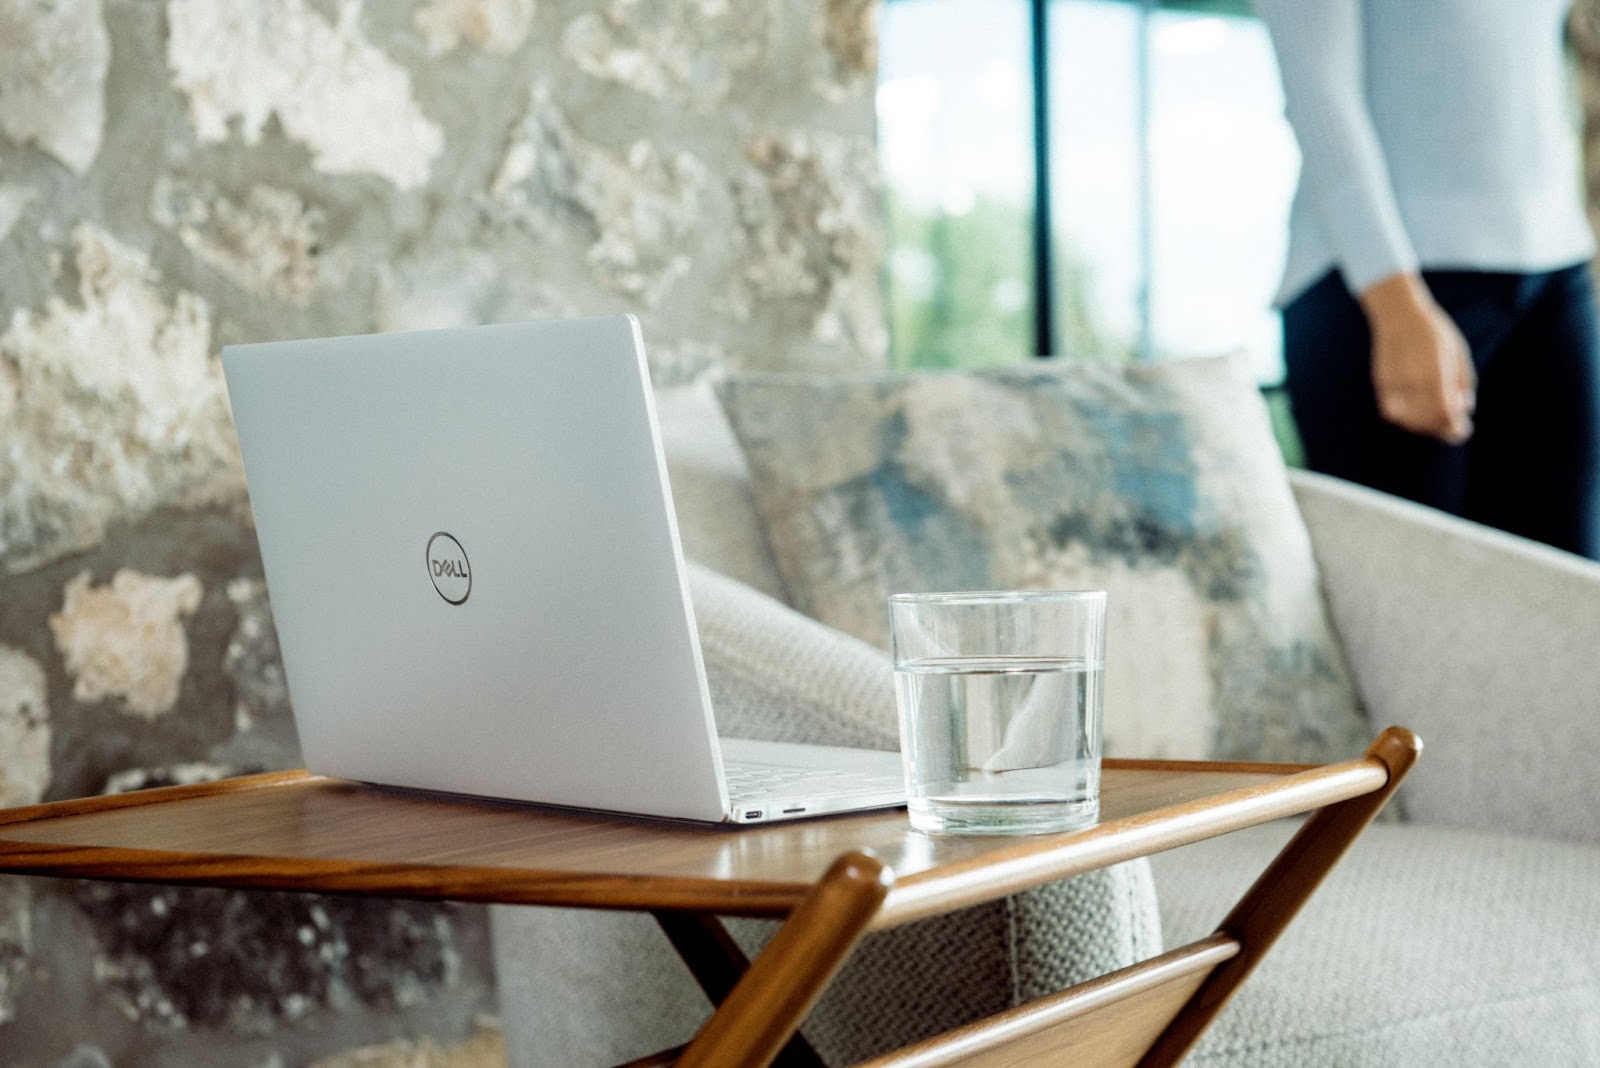 A dell laptop worth sits on a wooden tray table beside a glass of water, with a gray sofa and partial view of a standing person in the background, against a stone wall.